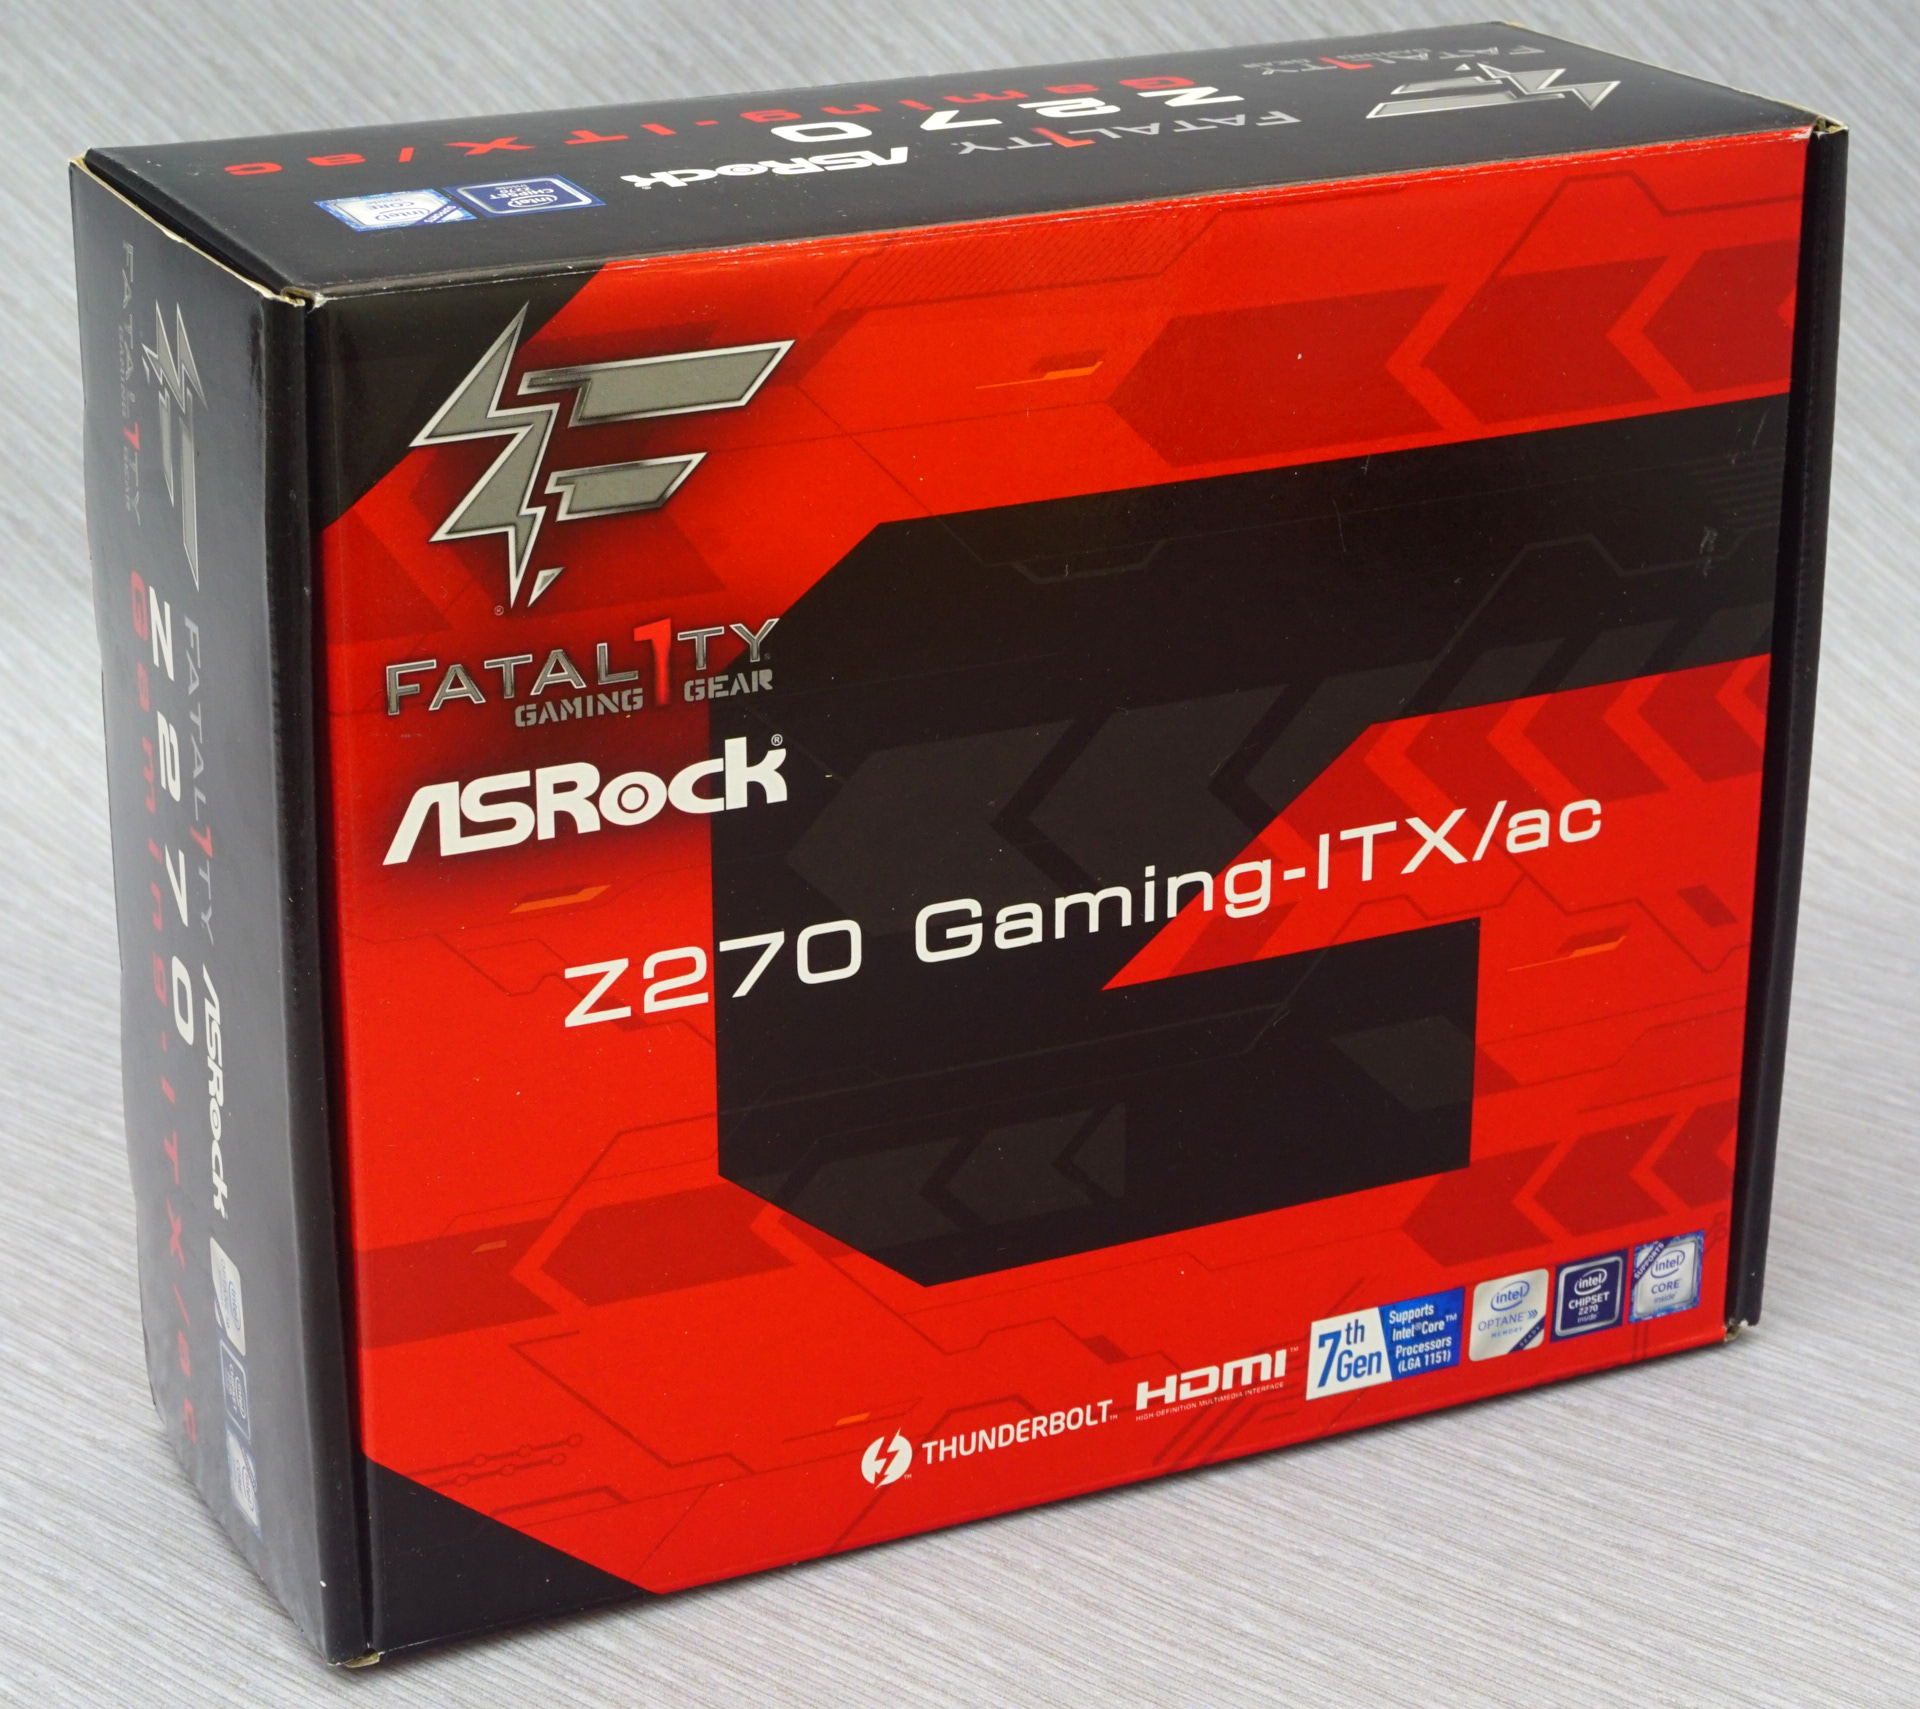 The Asrock Fatal1ty Z270 Gaming Itx Ac Motherboard Review